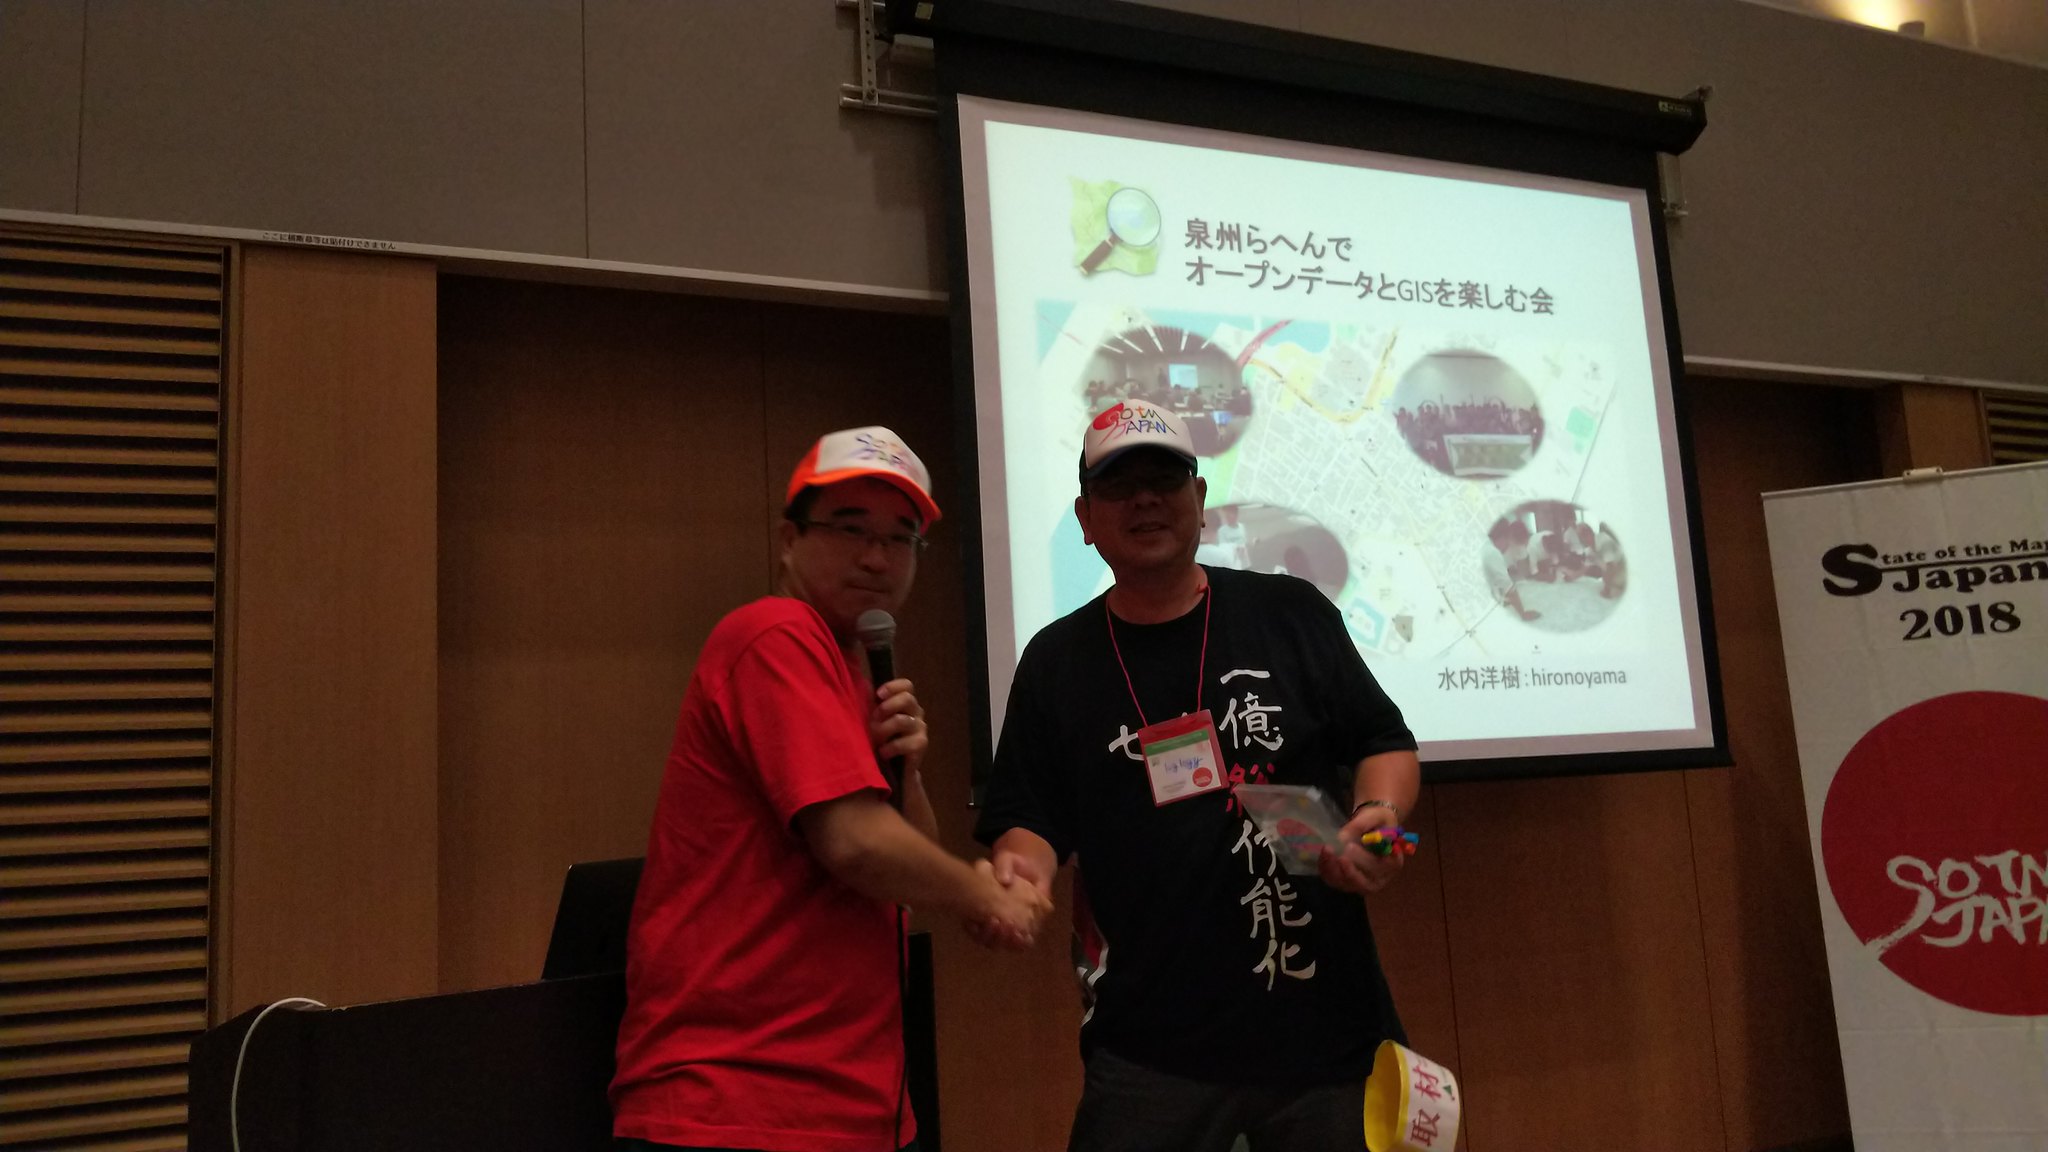 crafter(right) with winner(left) of hand drawing cap